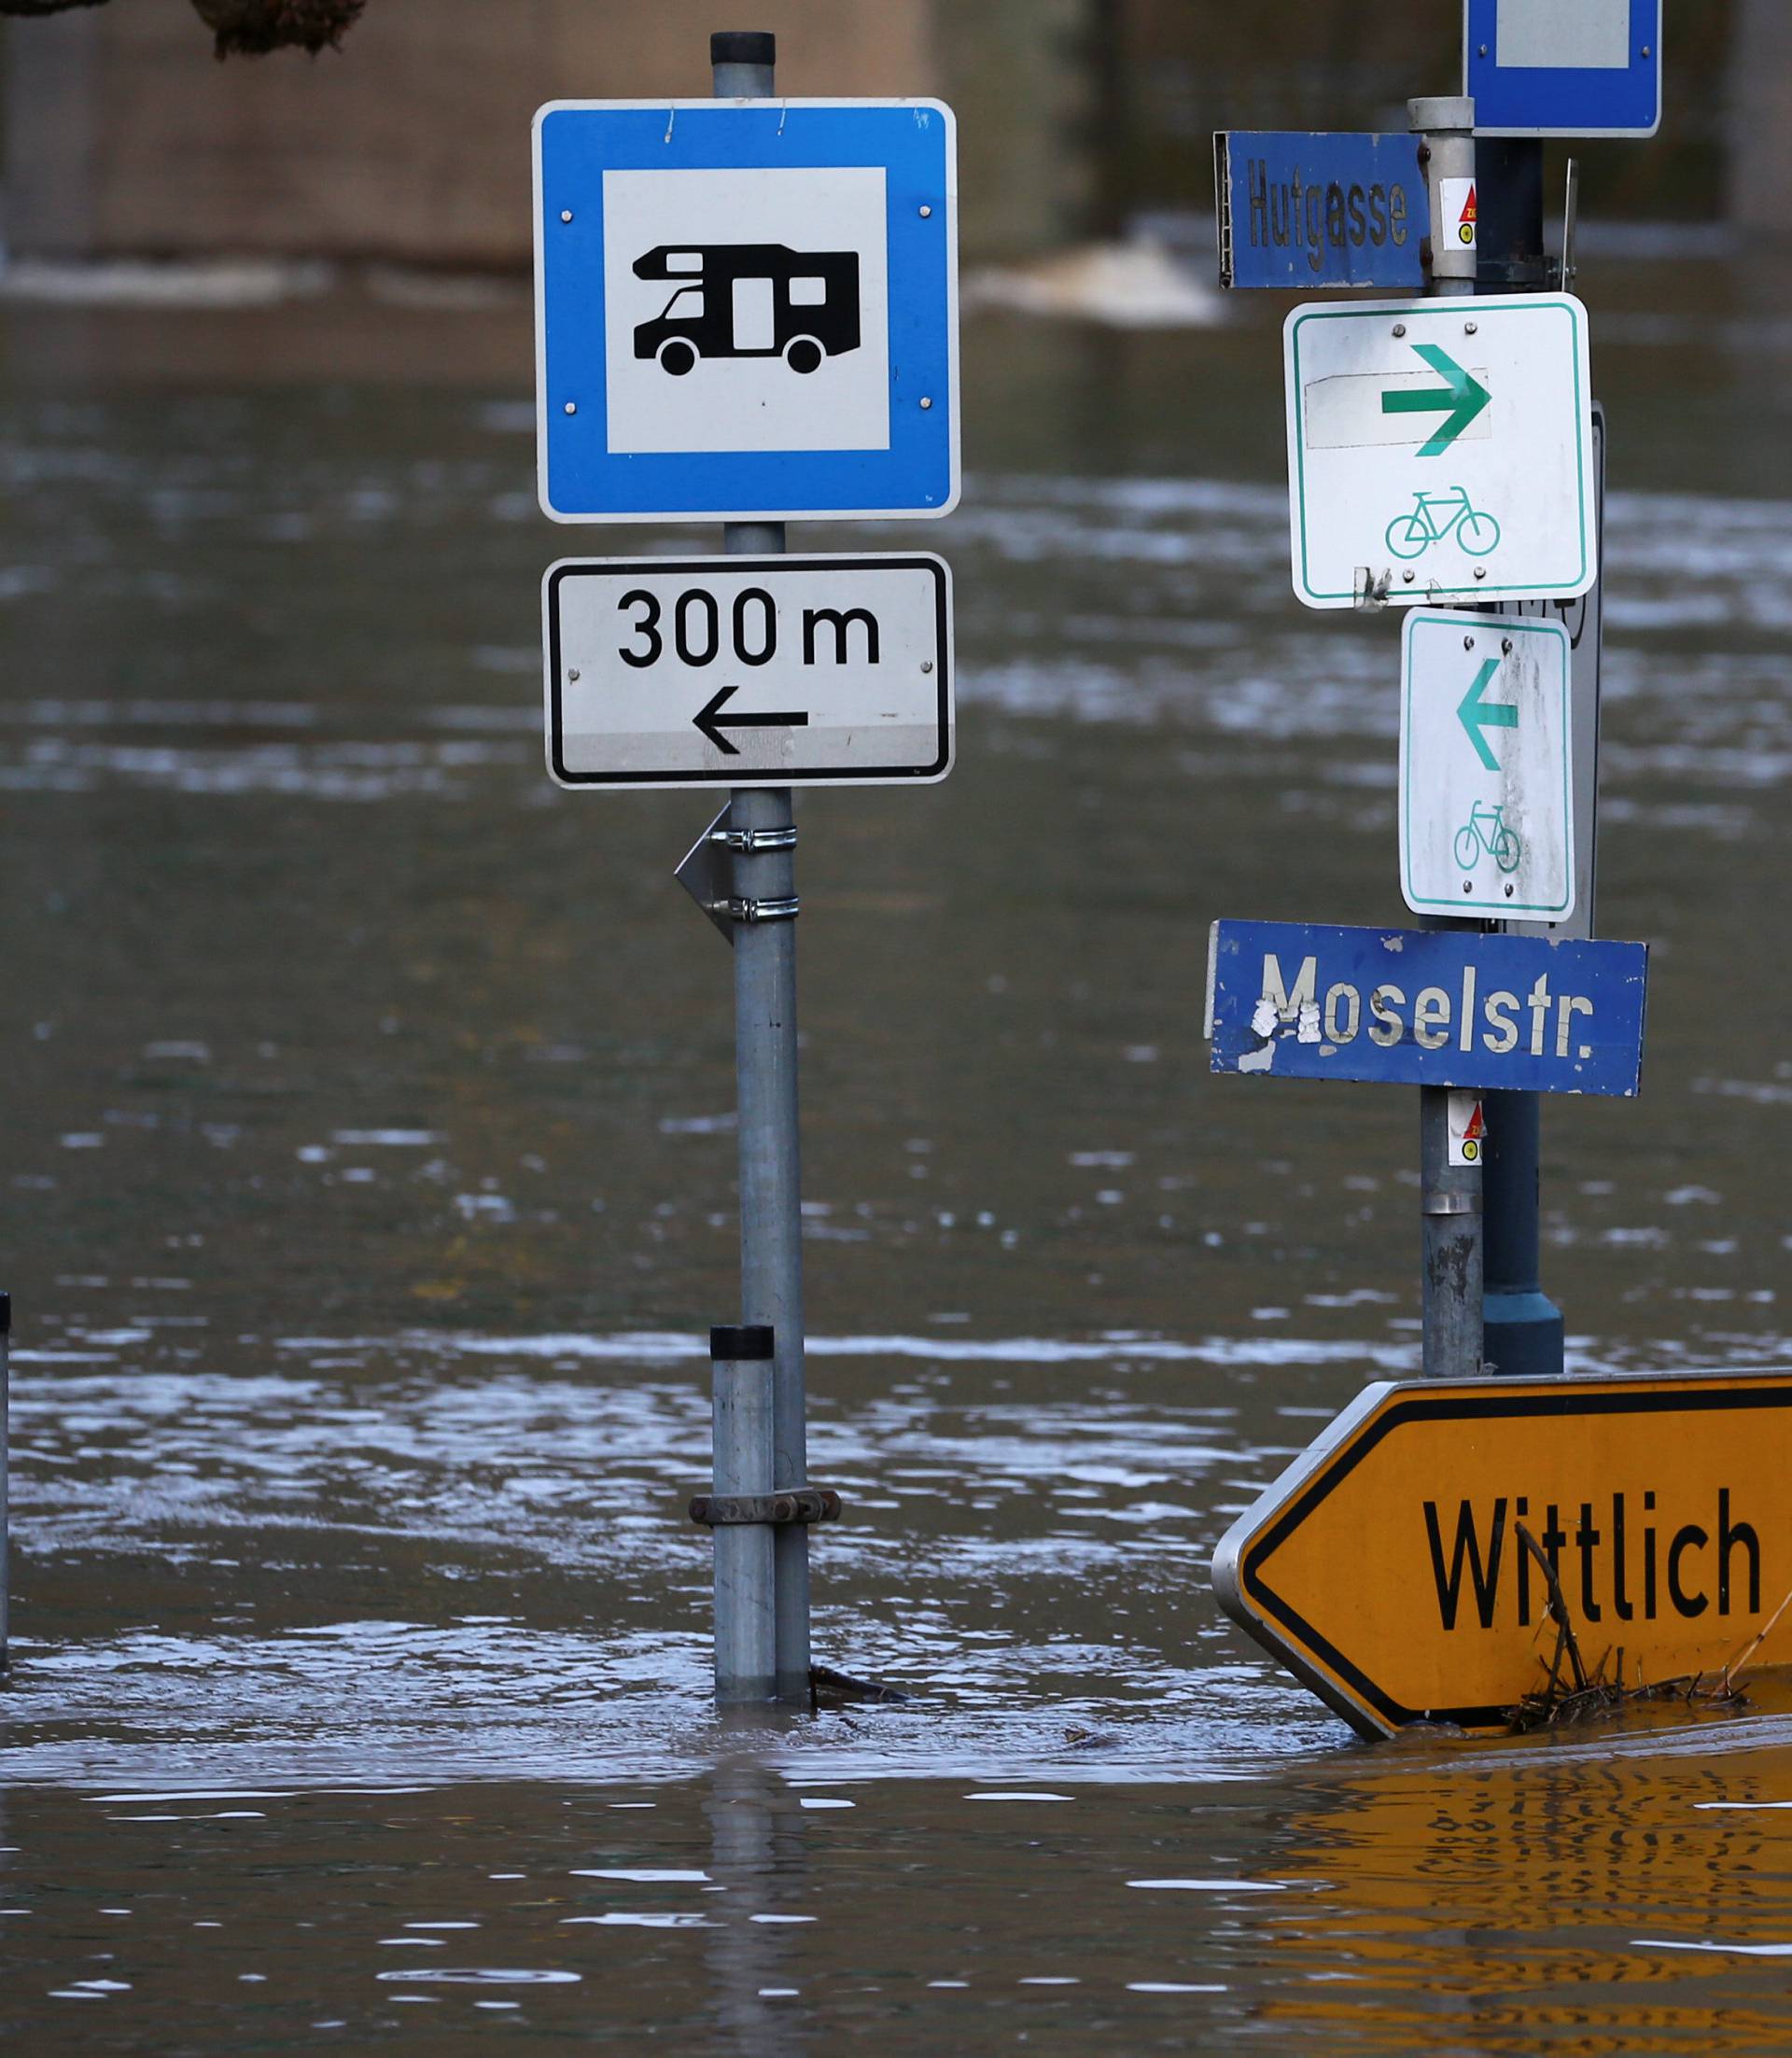 The street sign for the Moselle street is flooded by the river Moselle in Reil